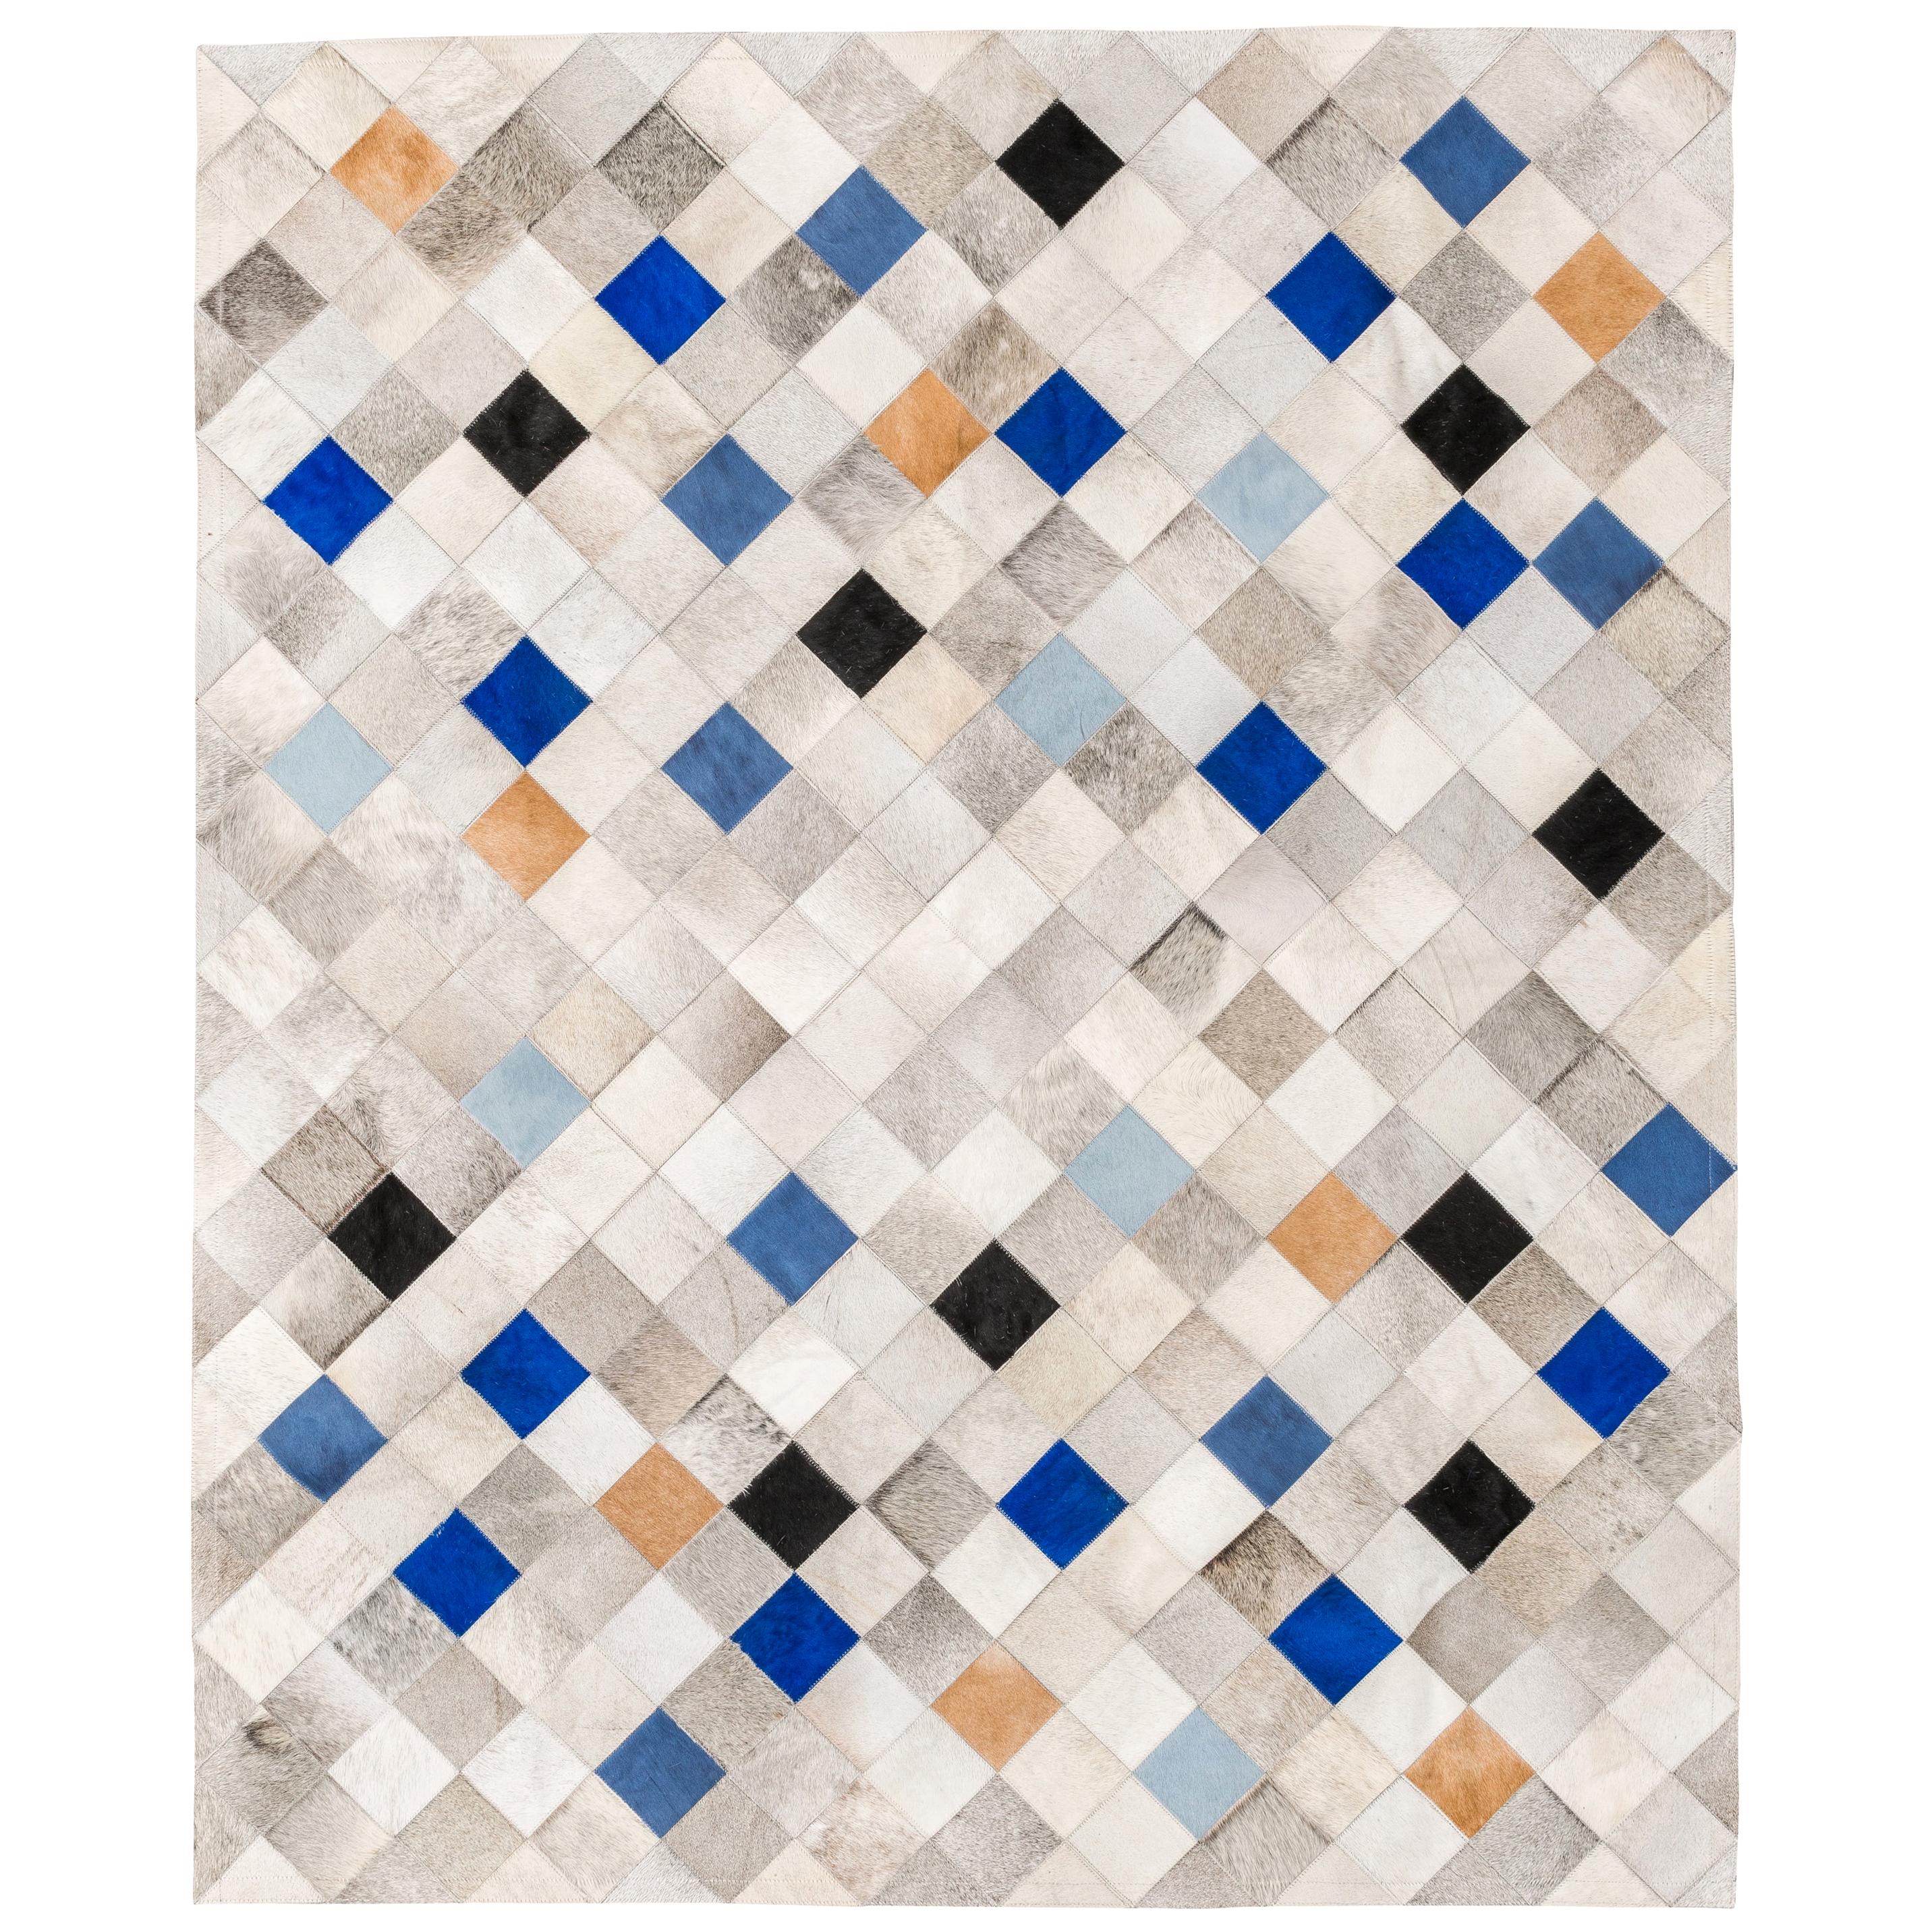 Striking and Unique Falling Squares Blue Cowhide Area Floor Rug Small